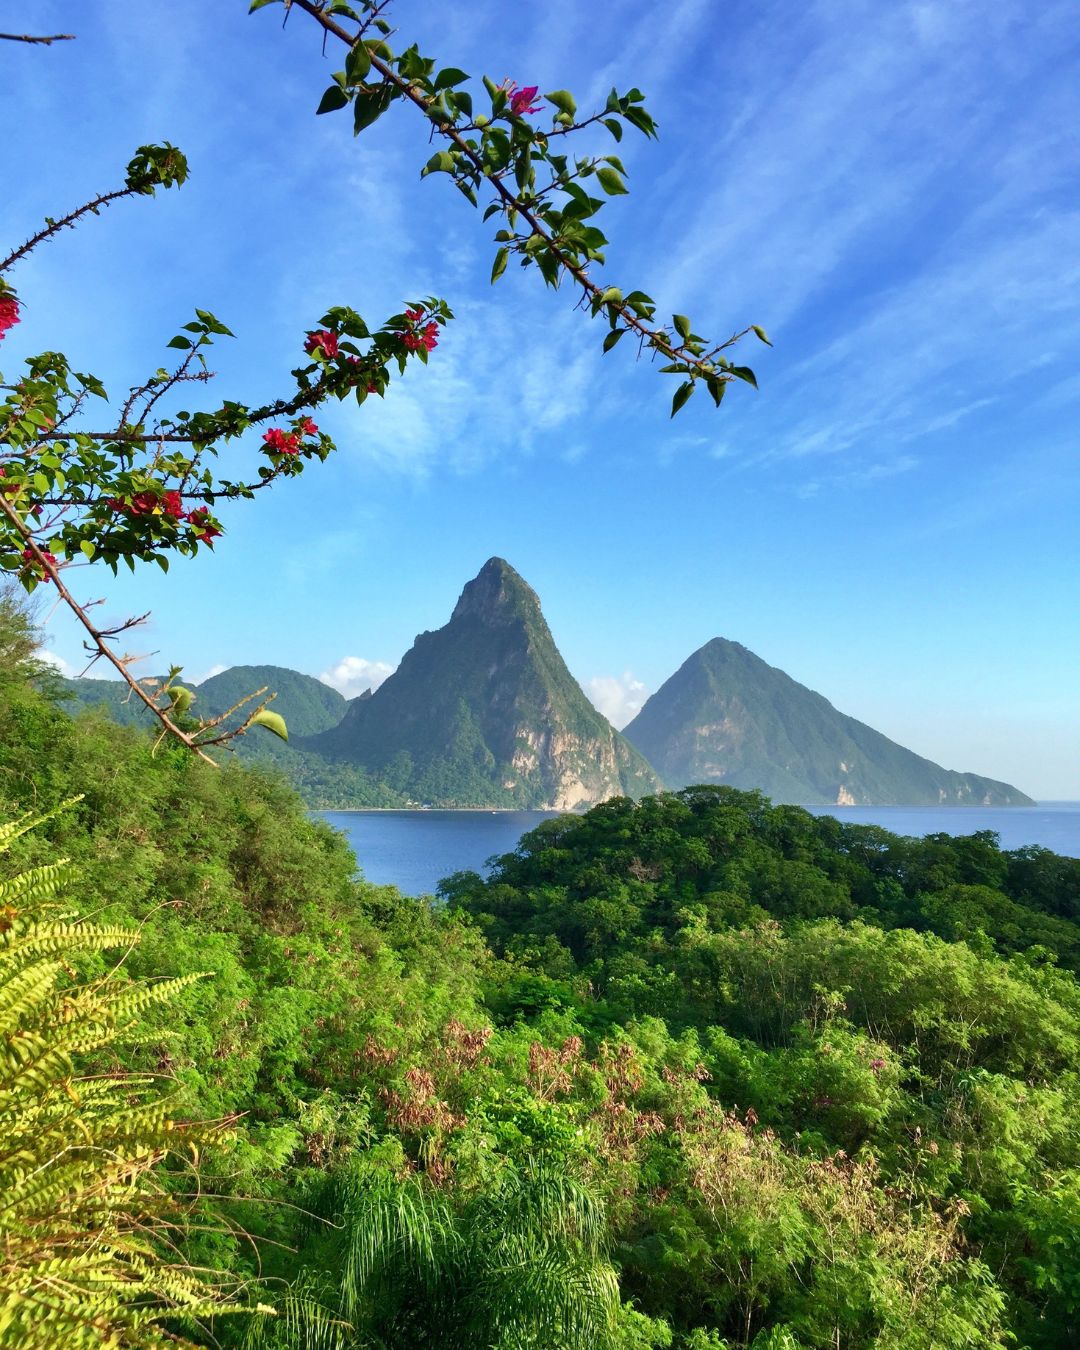 View of the pitons in Saint Lucia